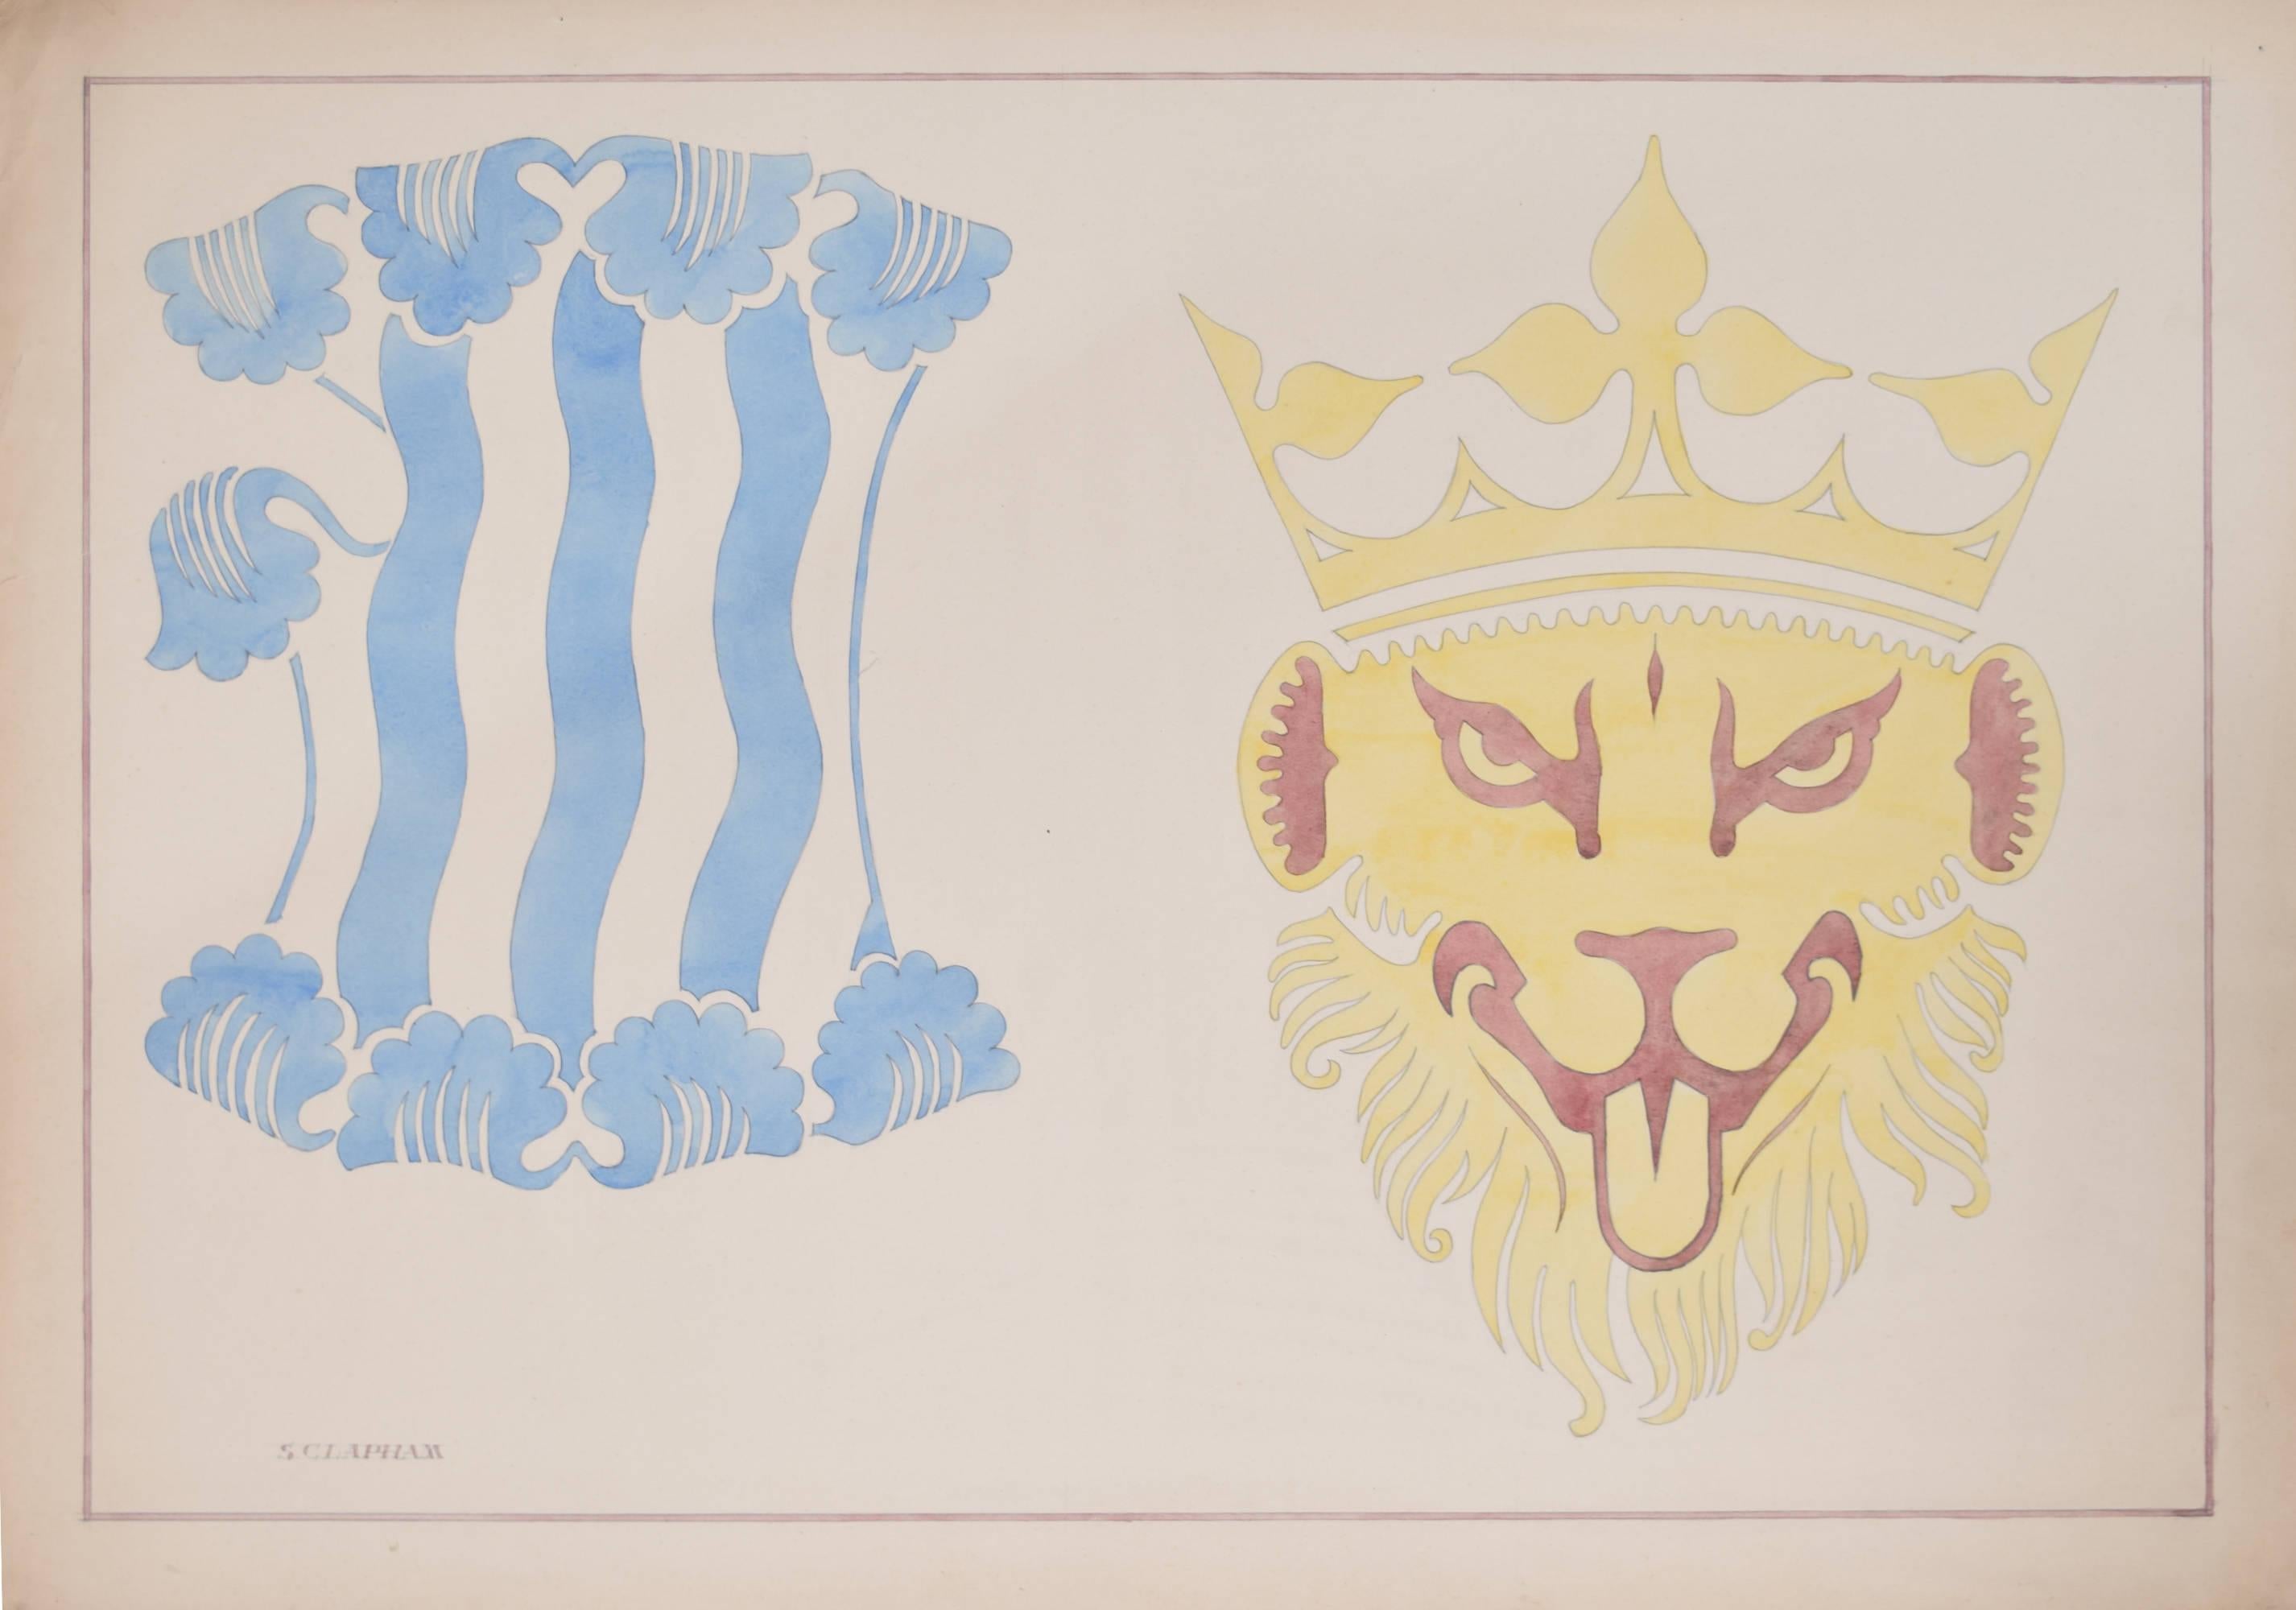 To see more, scroll down to "More from this Seller" and below it click on "See all from this Seller." 

S Clapham (active 1940 - 1960)
A Pair of Heraldic Designs
Watercolour
49 x 70 cm

Signed lower right.

Clapham was an architect based in